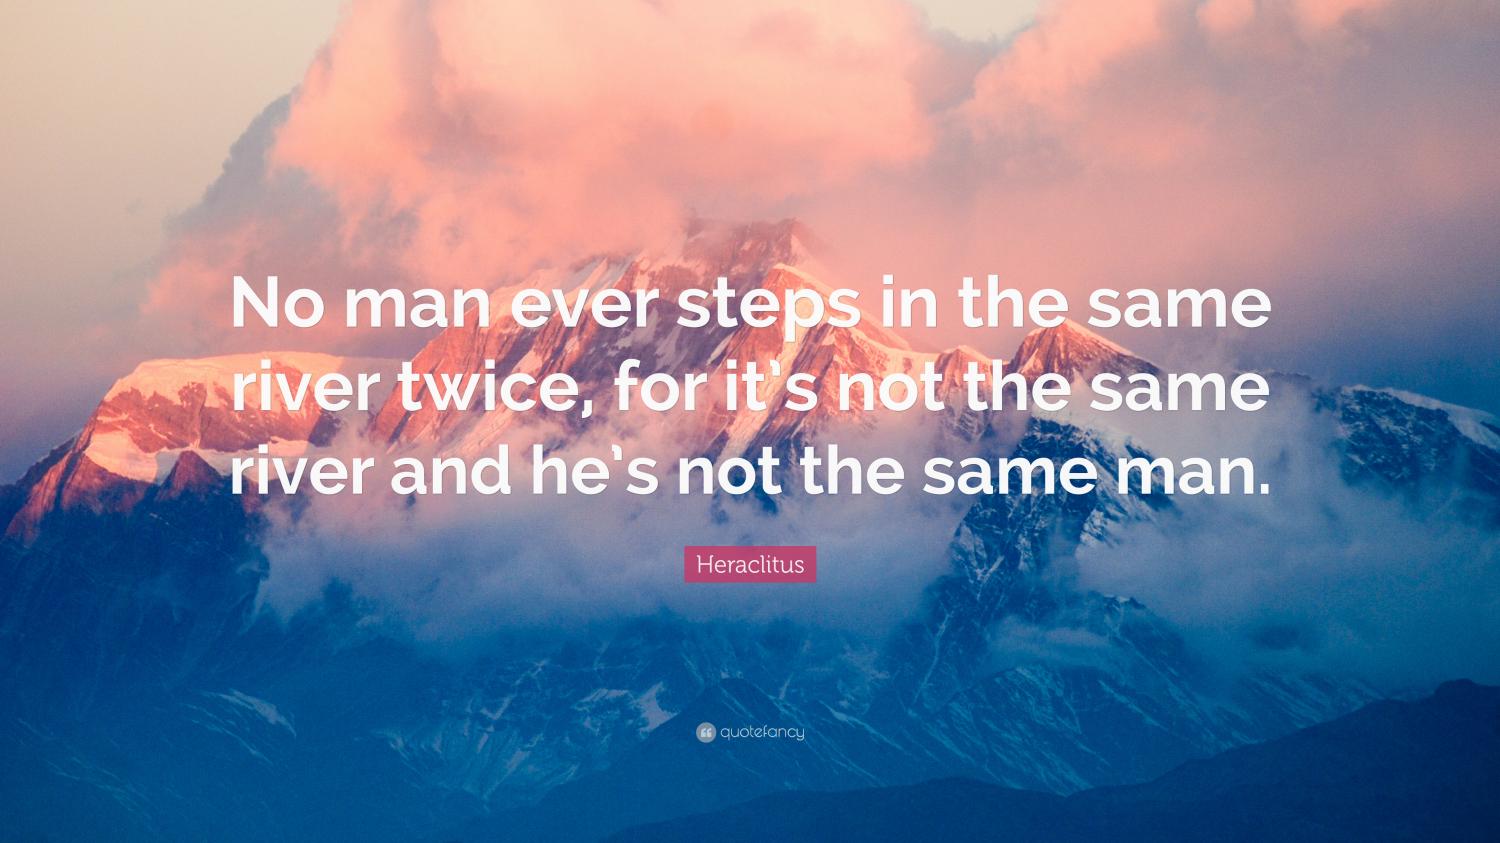 https://cdn.noron.vn/2022/07/13/2039754-heraclitus-quote-no-man-ever-steps-in-the-same-river-twice-for-it-1657686741.jpg